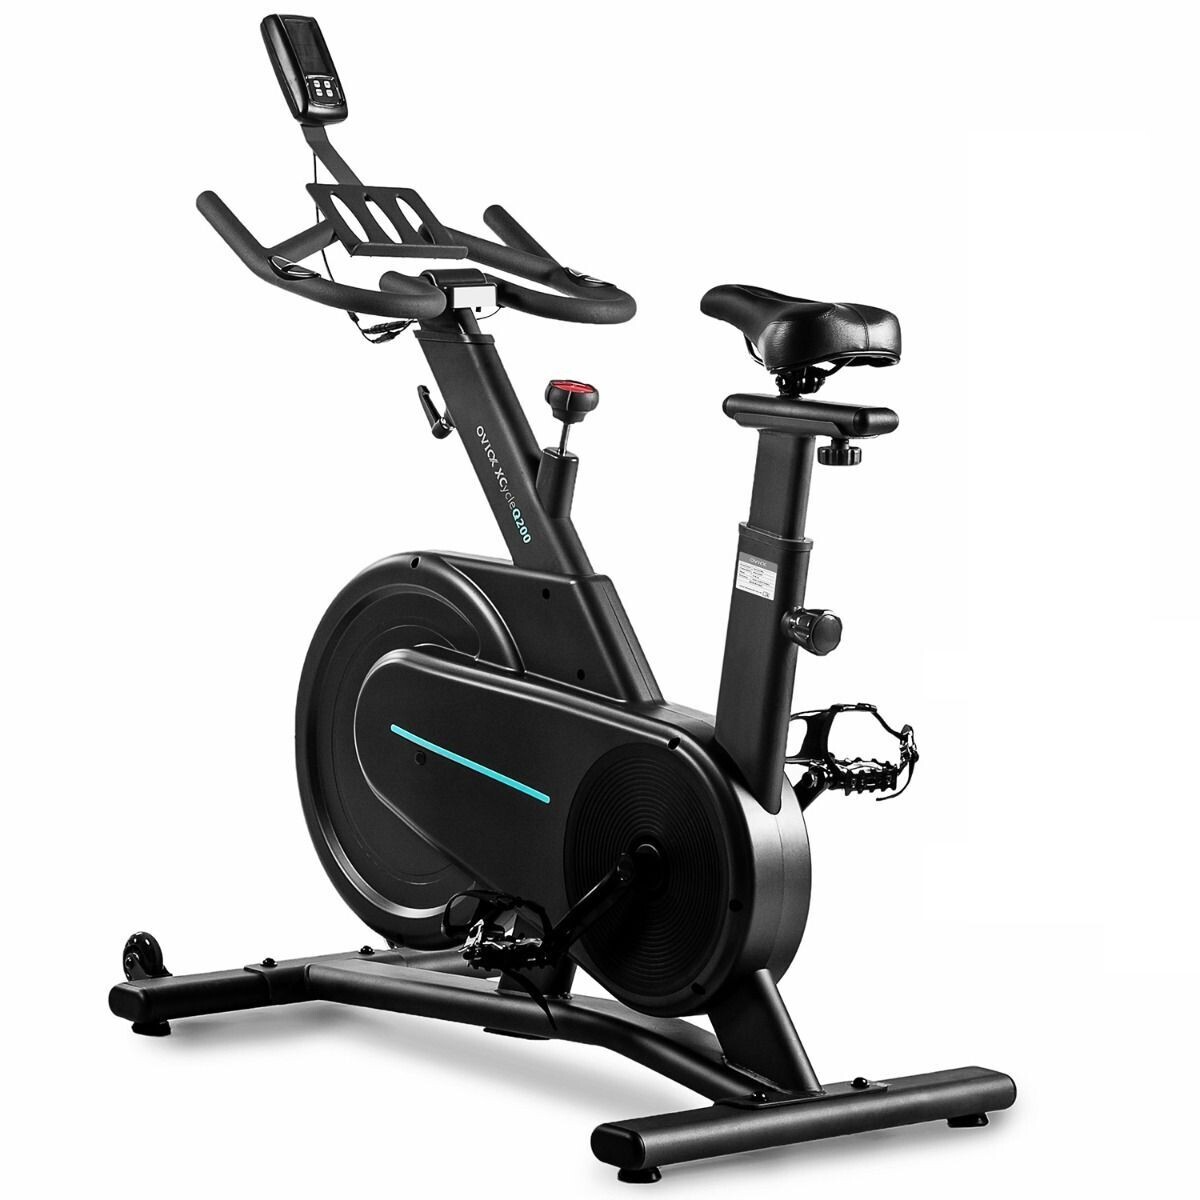 Ovicx Cyclette da spinning